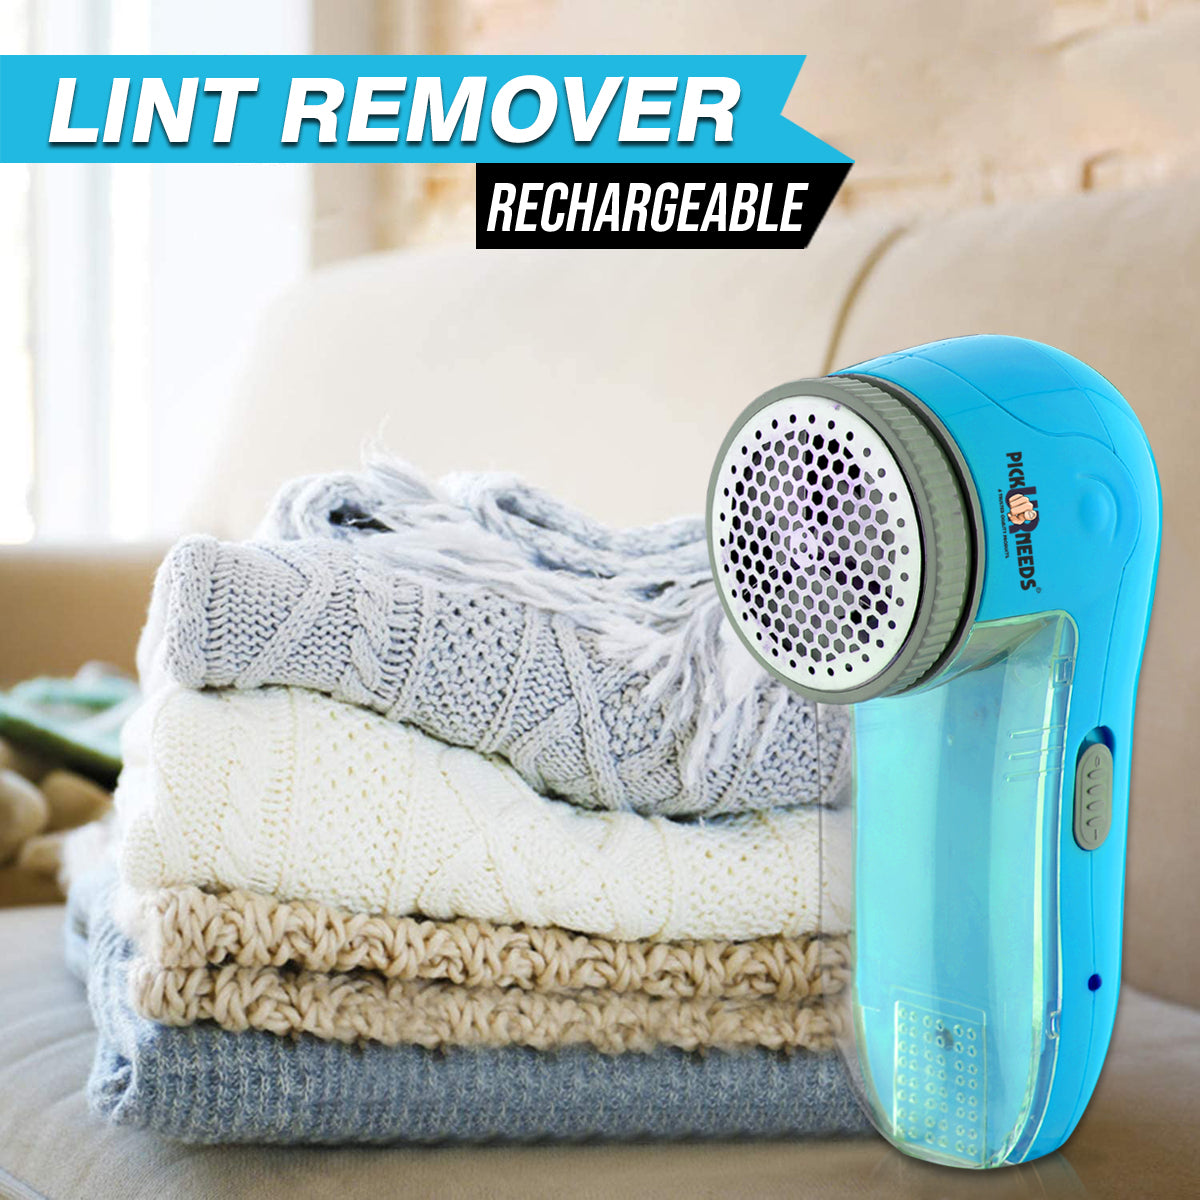 Pick Ur Needs Lint Remover for Clothing with Rechargeable USB Charging Cord, Ball Shaver with 1 Extra Floating Blade, No More Lint